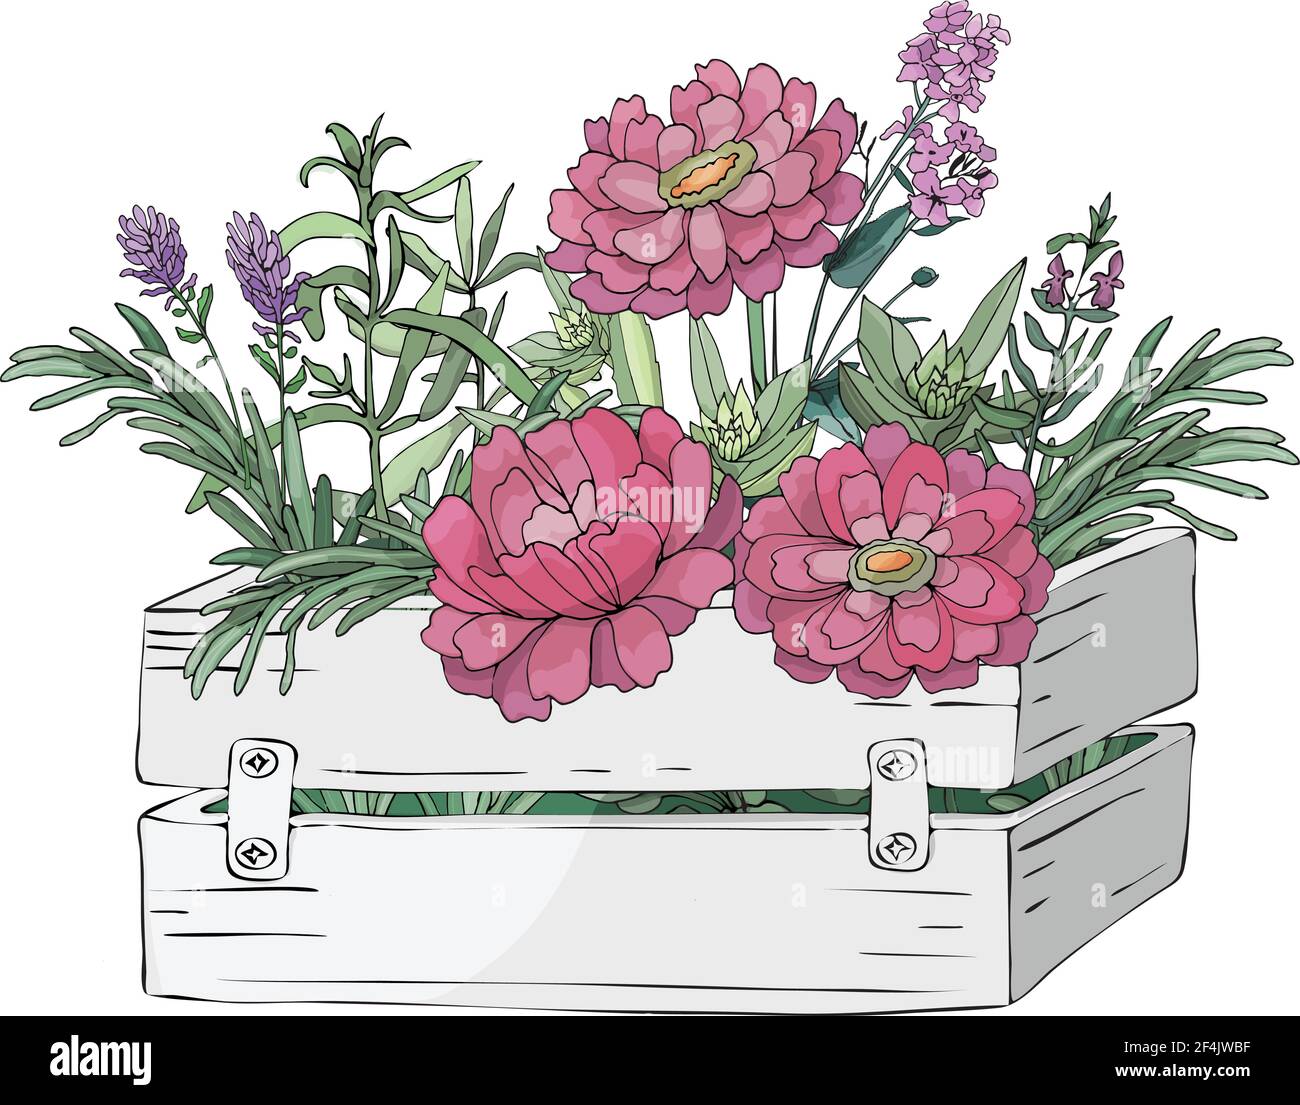 Garden flowers and leaves in a wooden box and farm fresh cooking herbs. Stock Vector